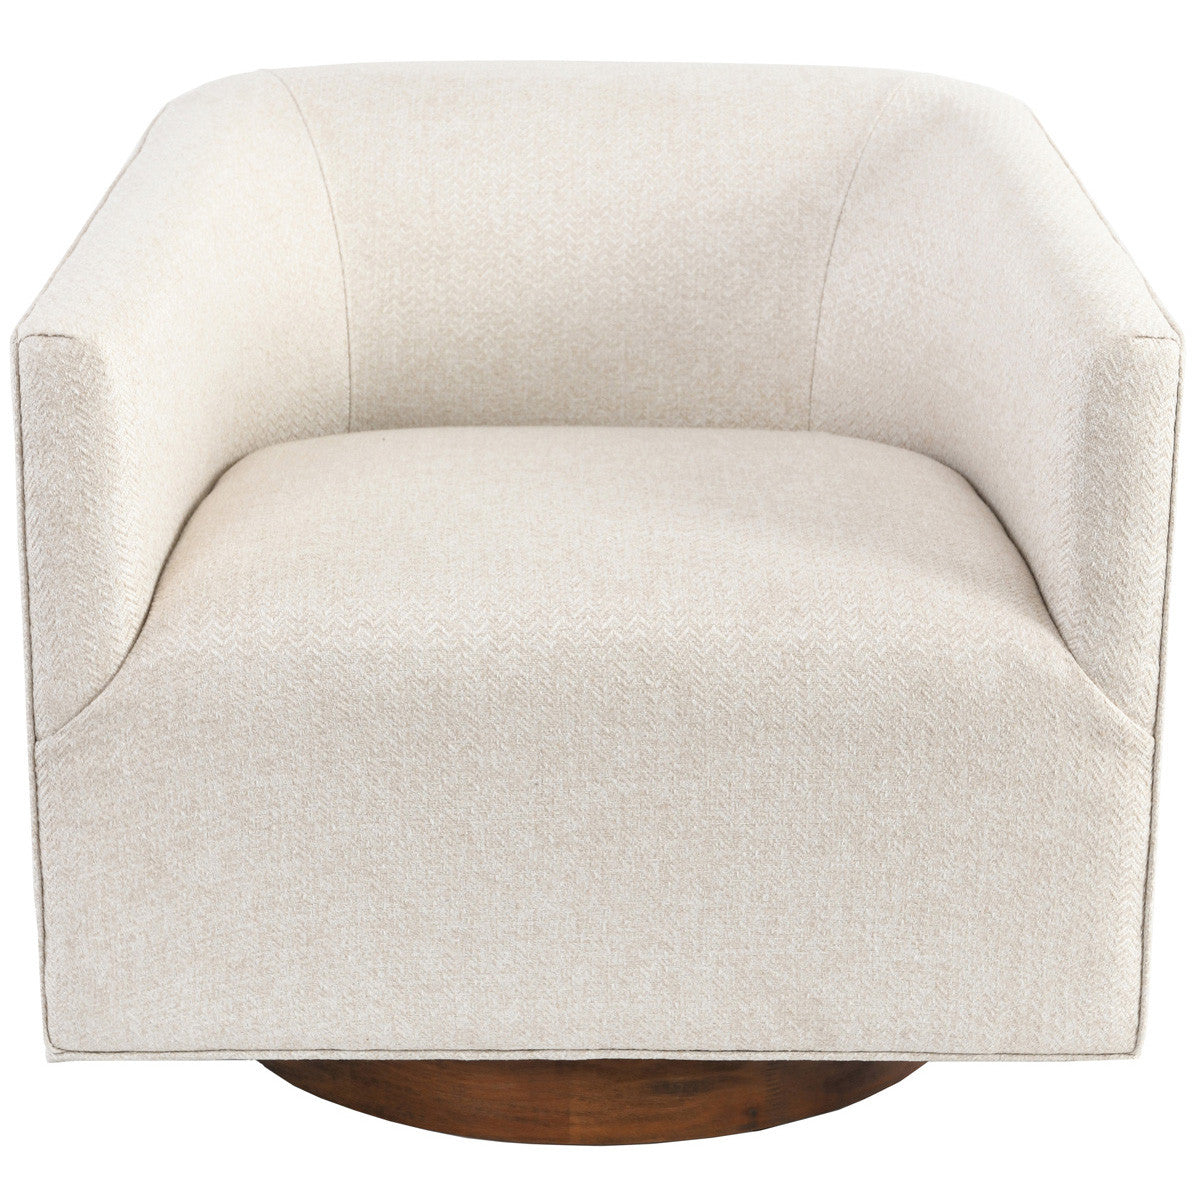 30" Beige and Wood Brown Polyester Chevron Swivel Barrel Chair